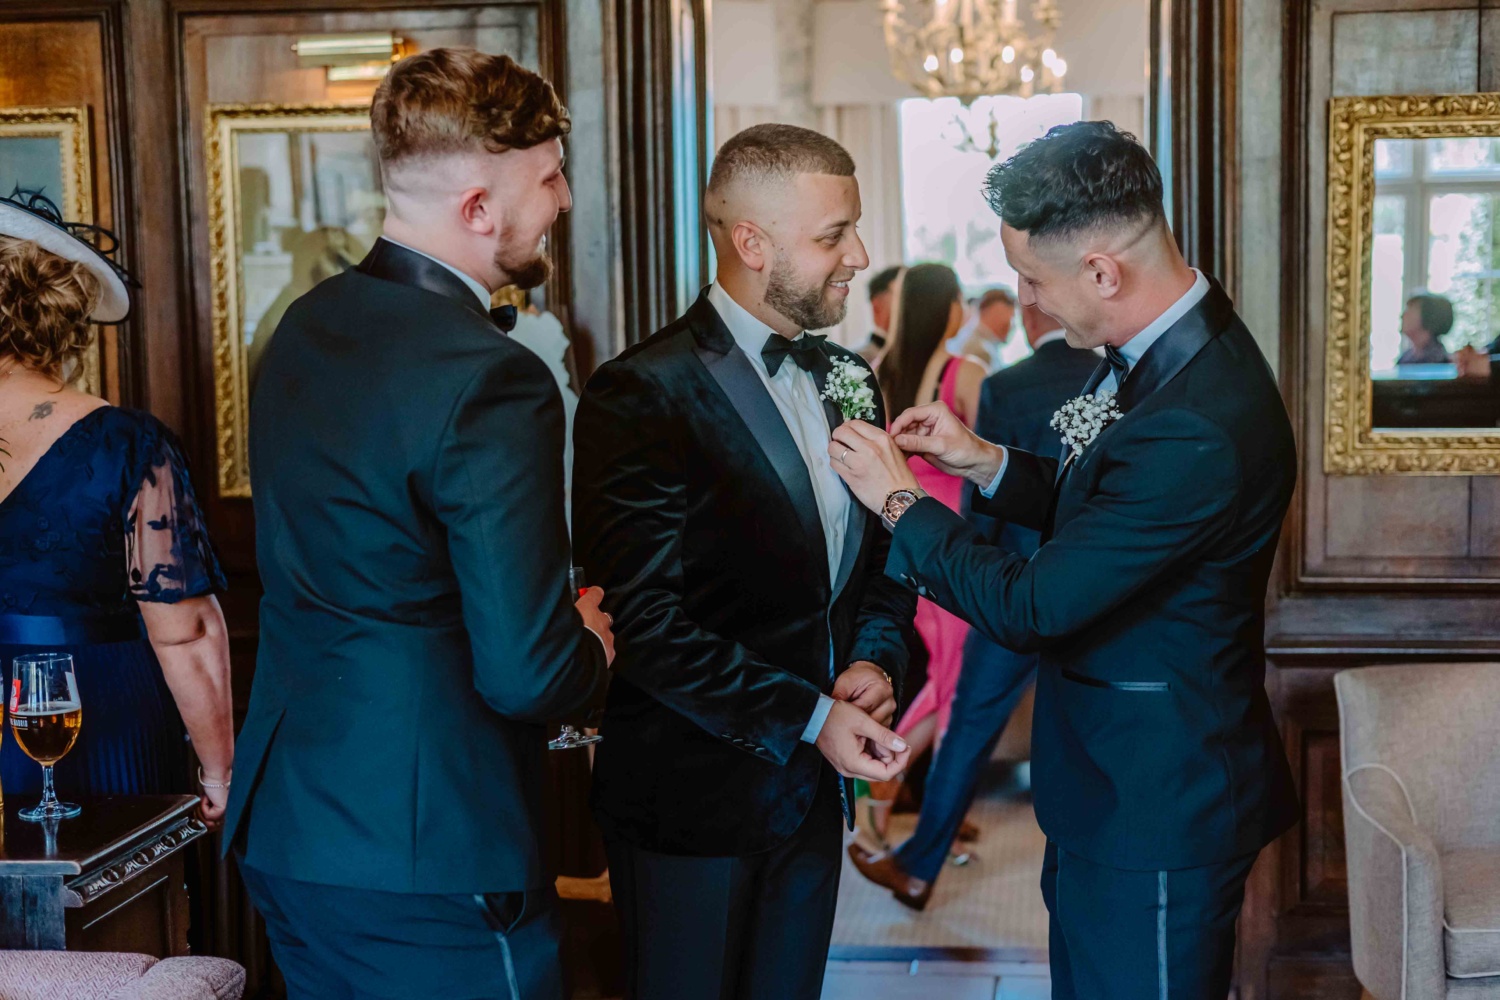 Best men fastening the buttonhole for the groom.